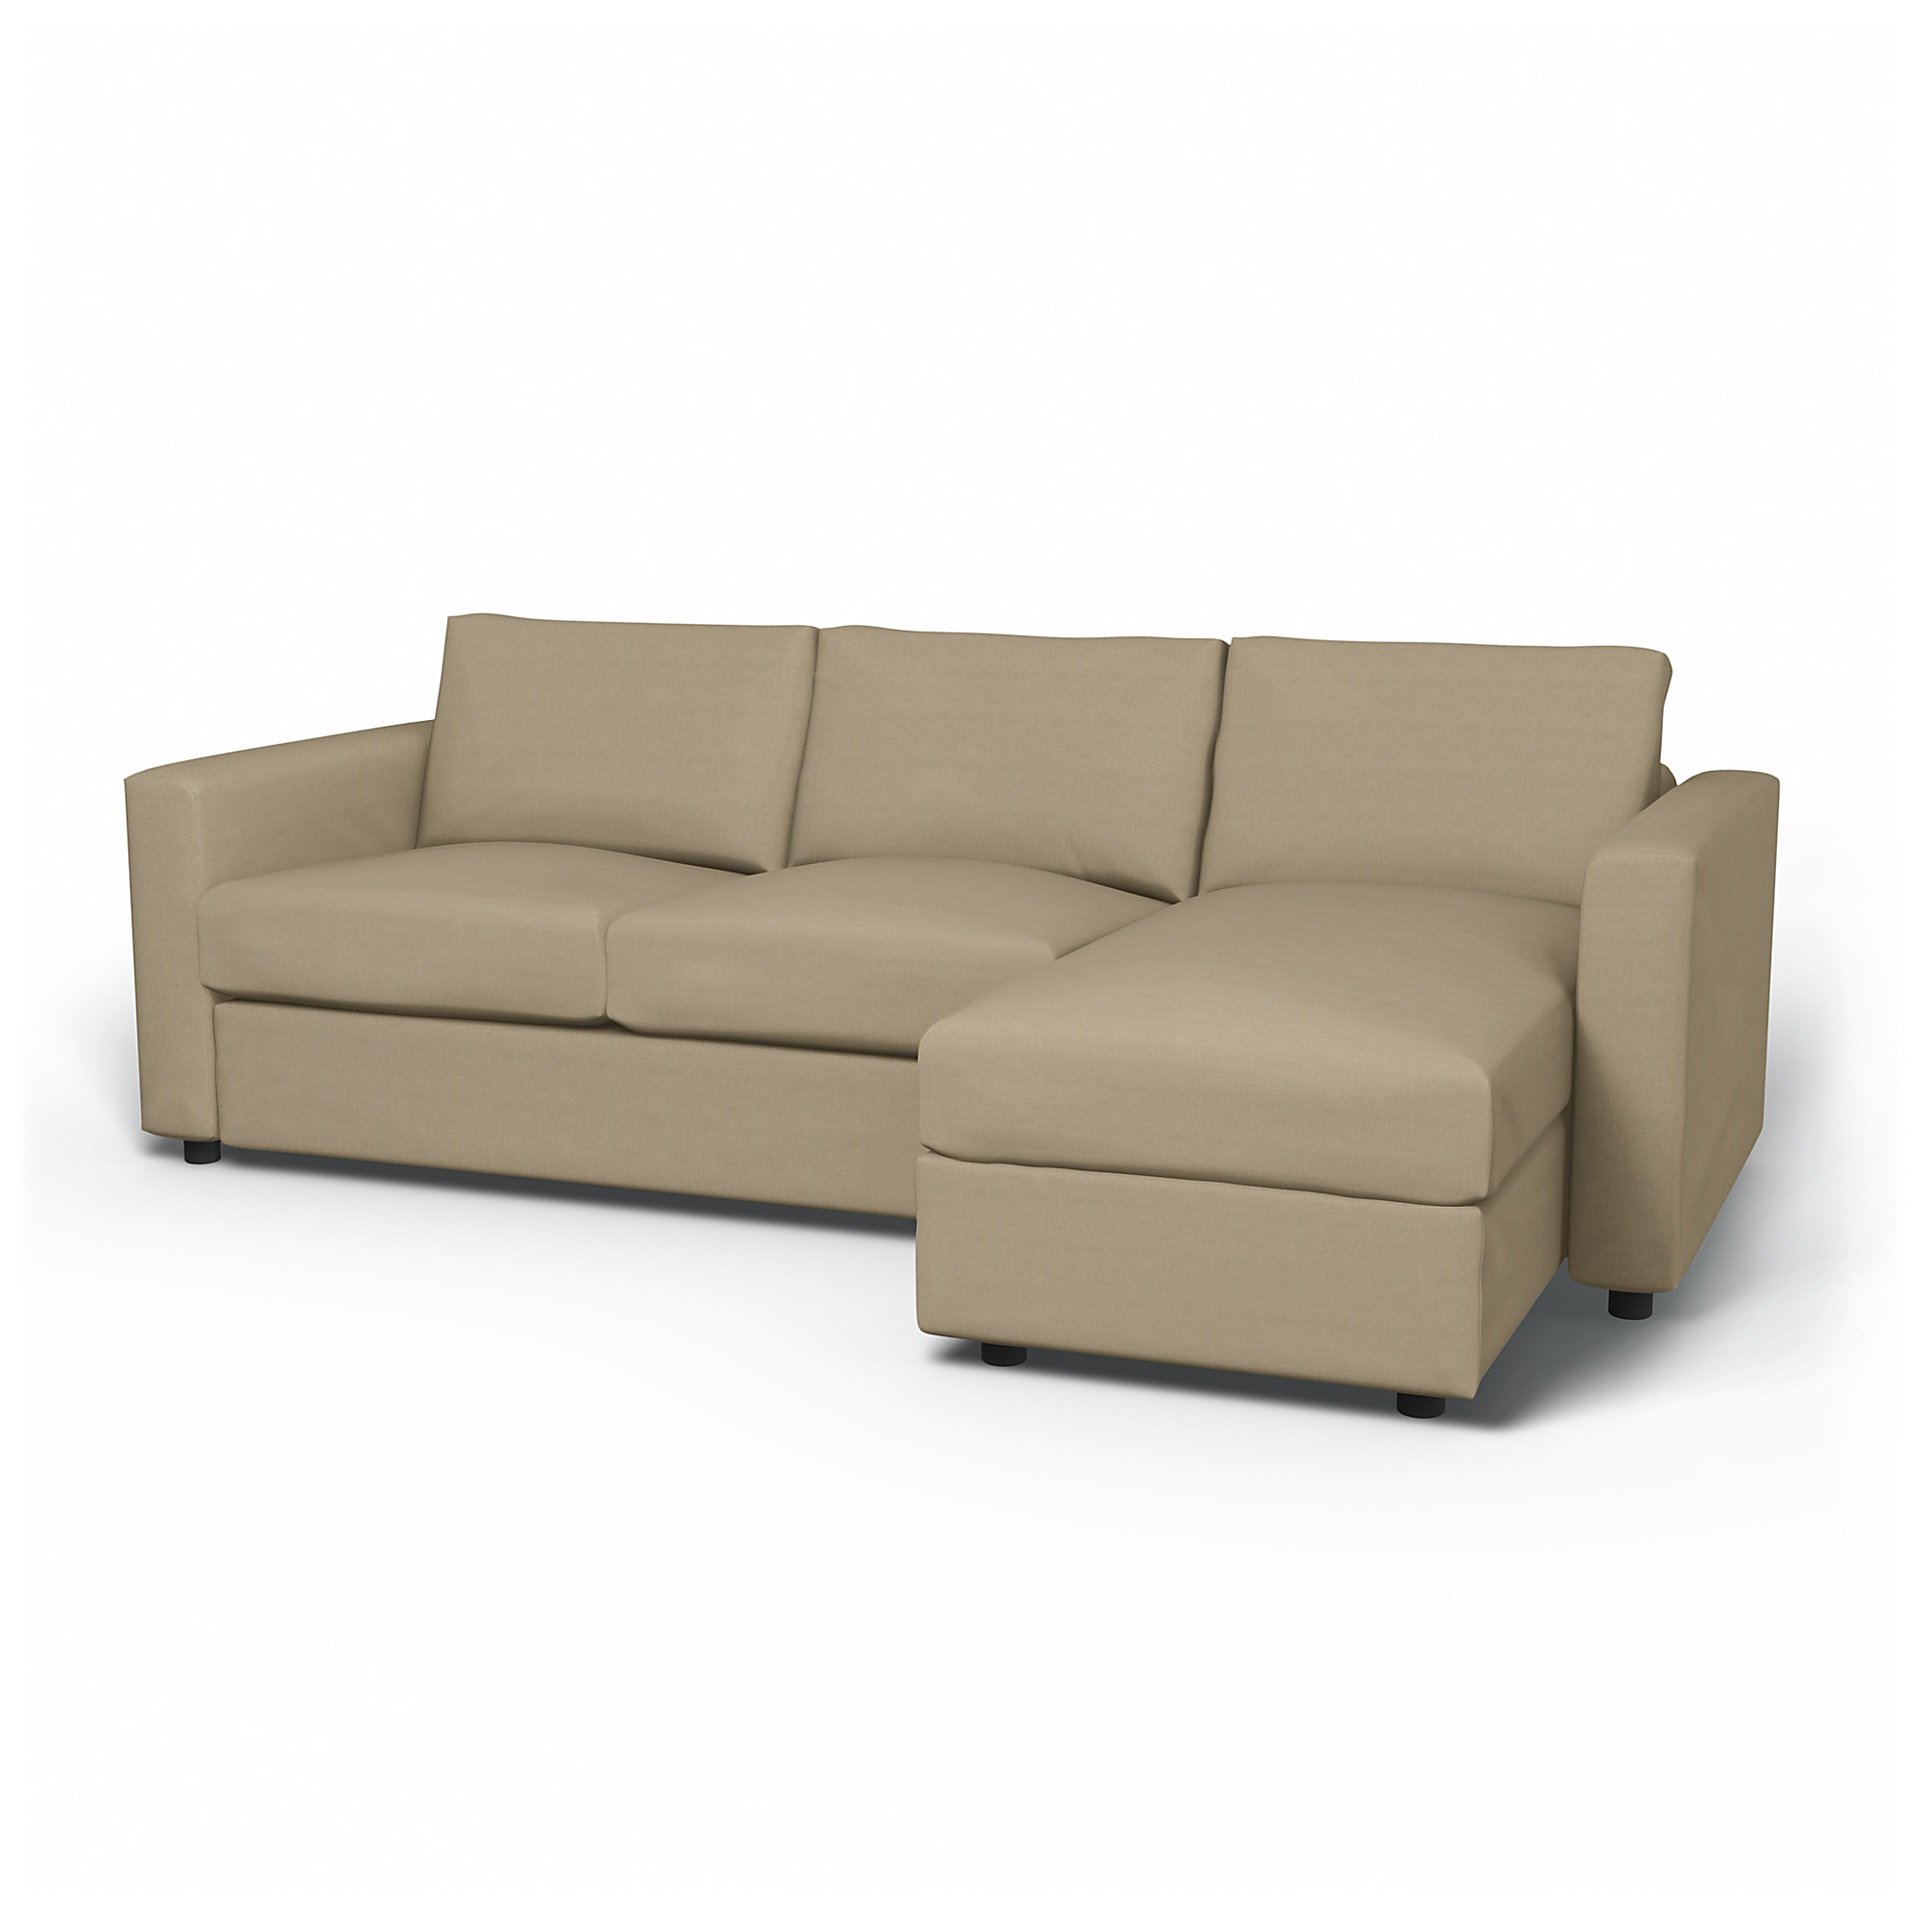 IKEA - Vimle 2 Seater Sofa with Chaise Cover, Tan, Linen - Bemz